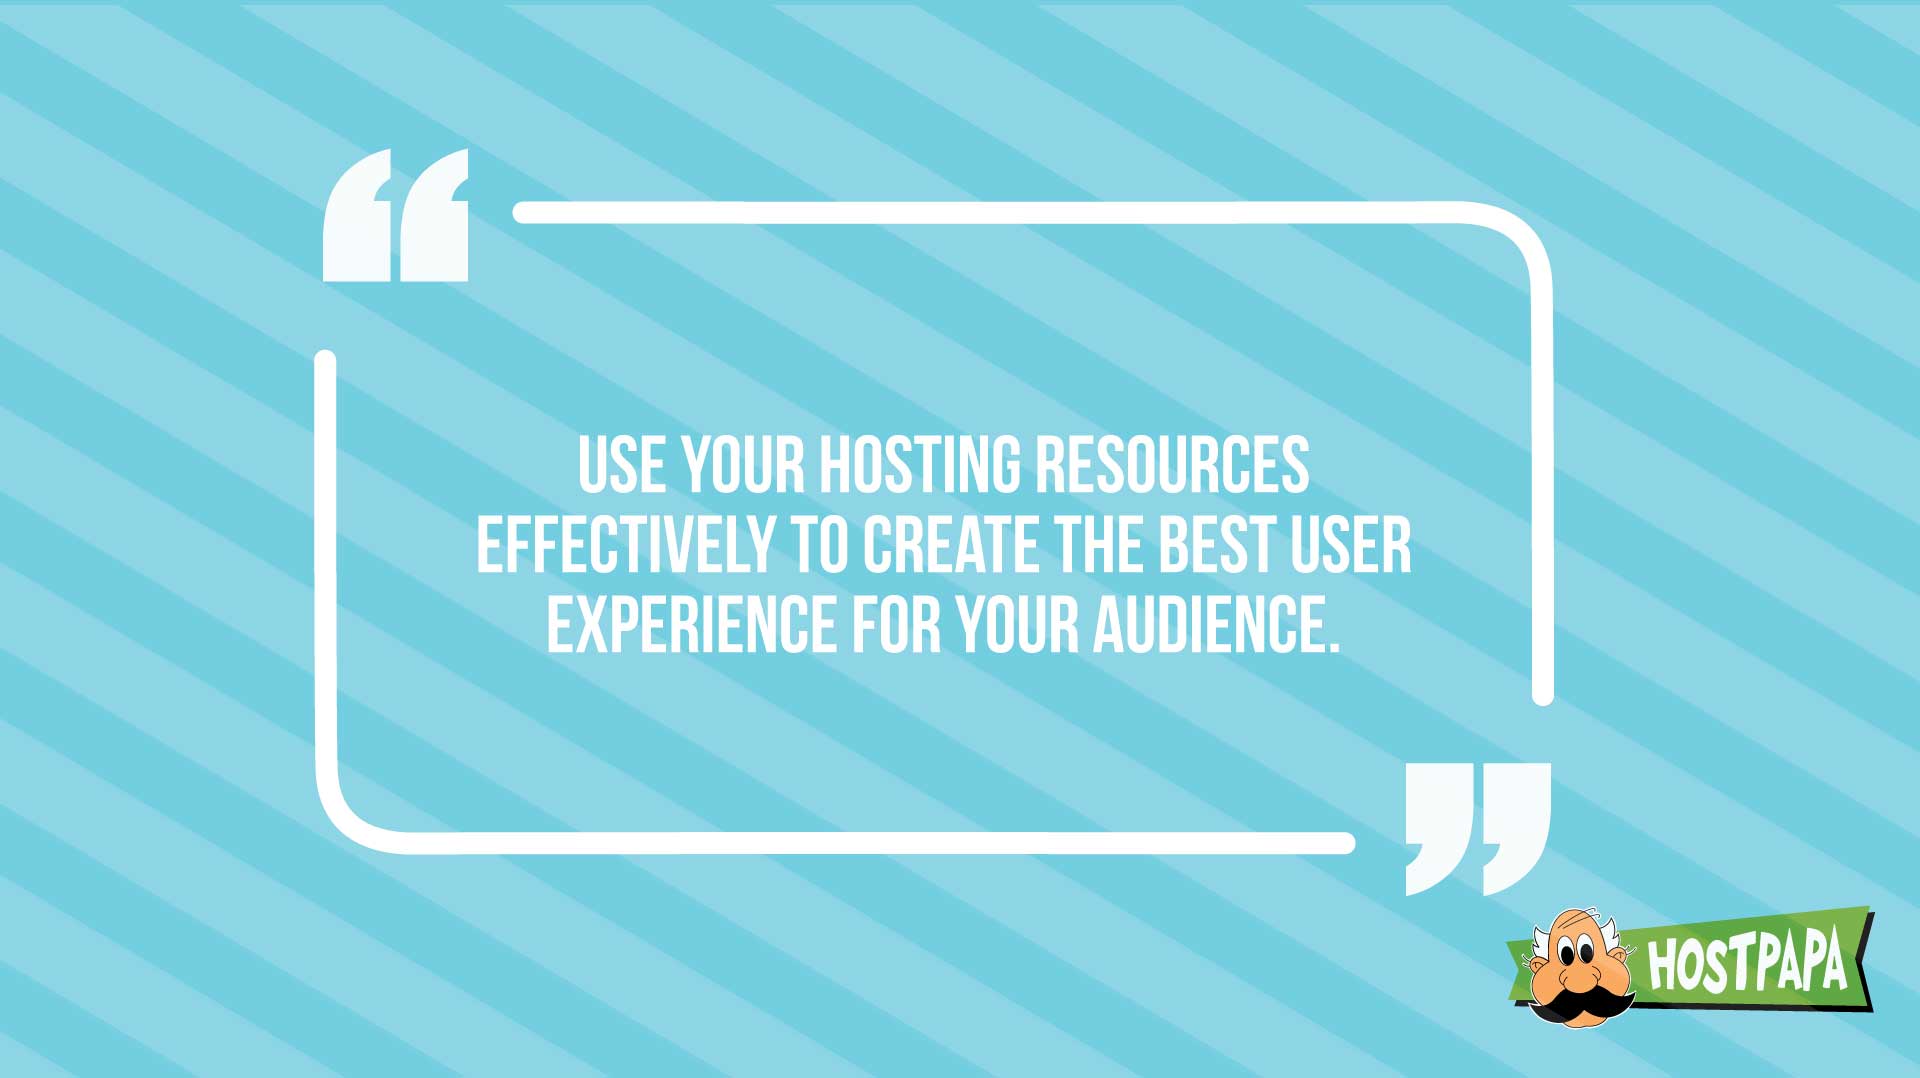 Use your hosting resources effectively to create the best user experience for your audience